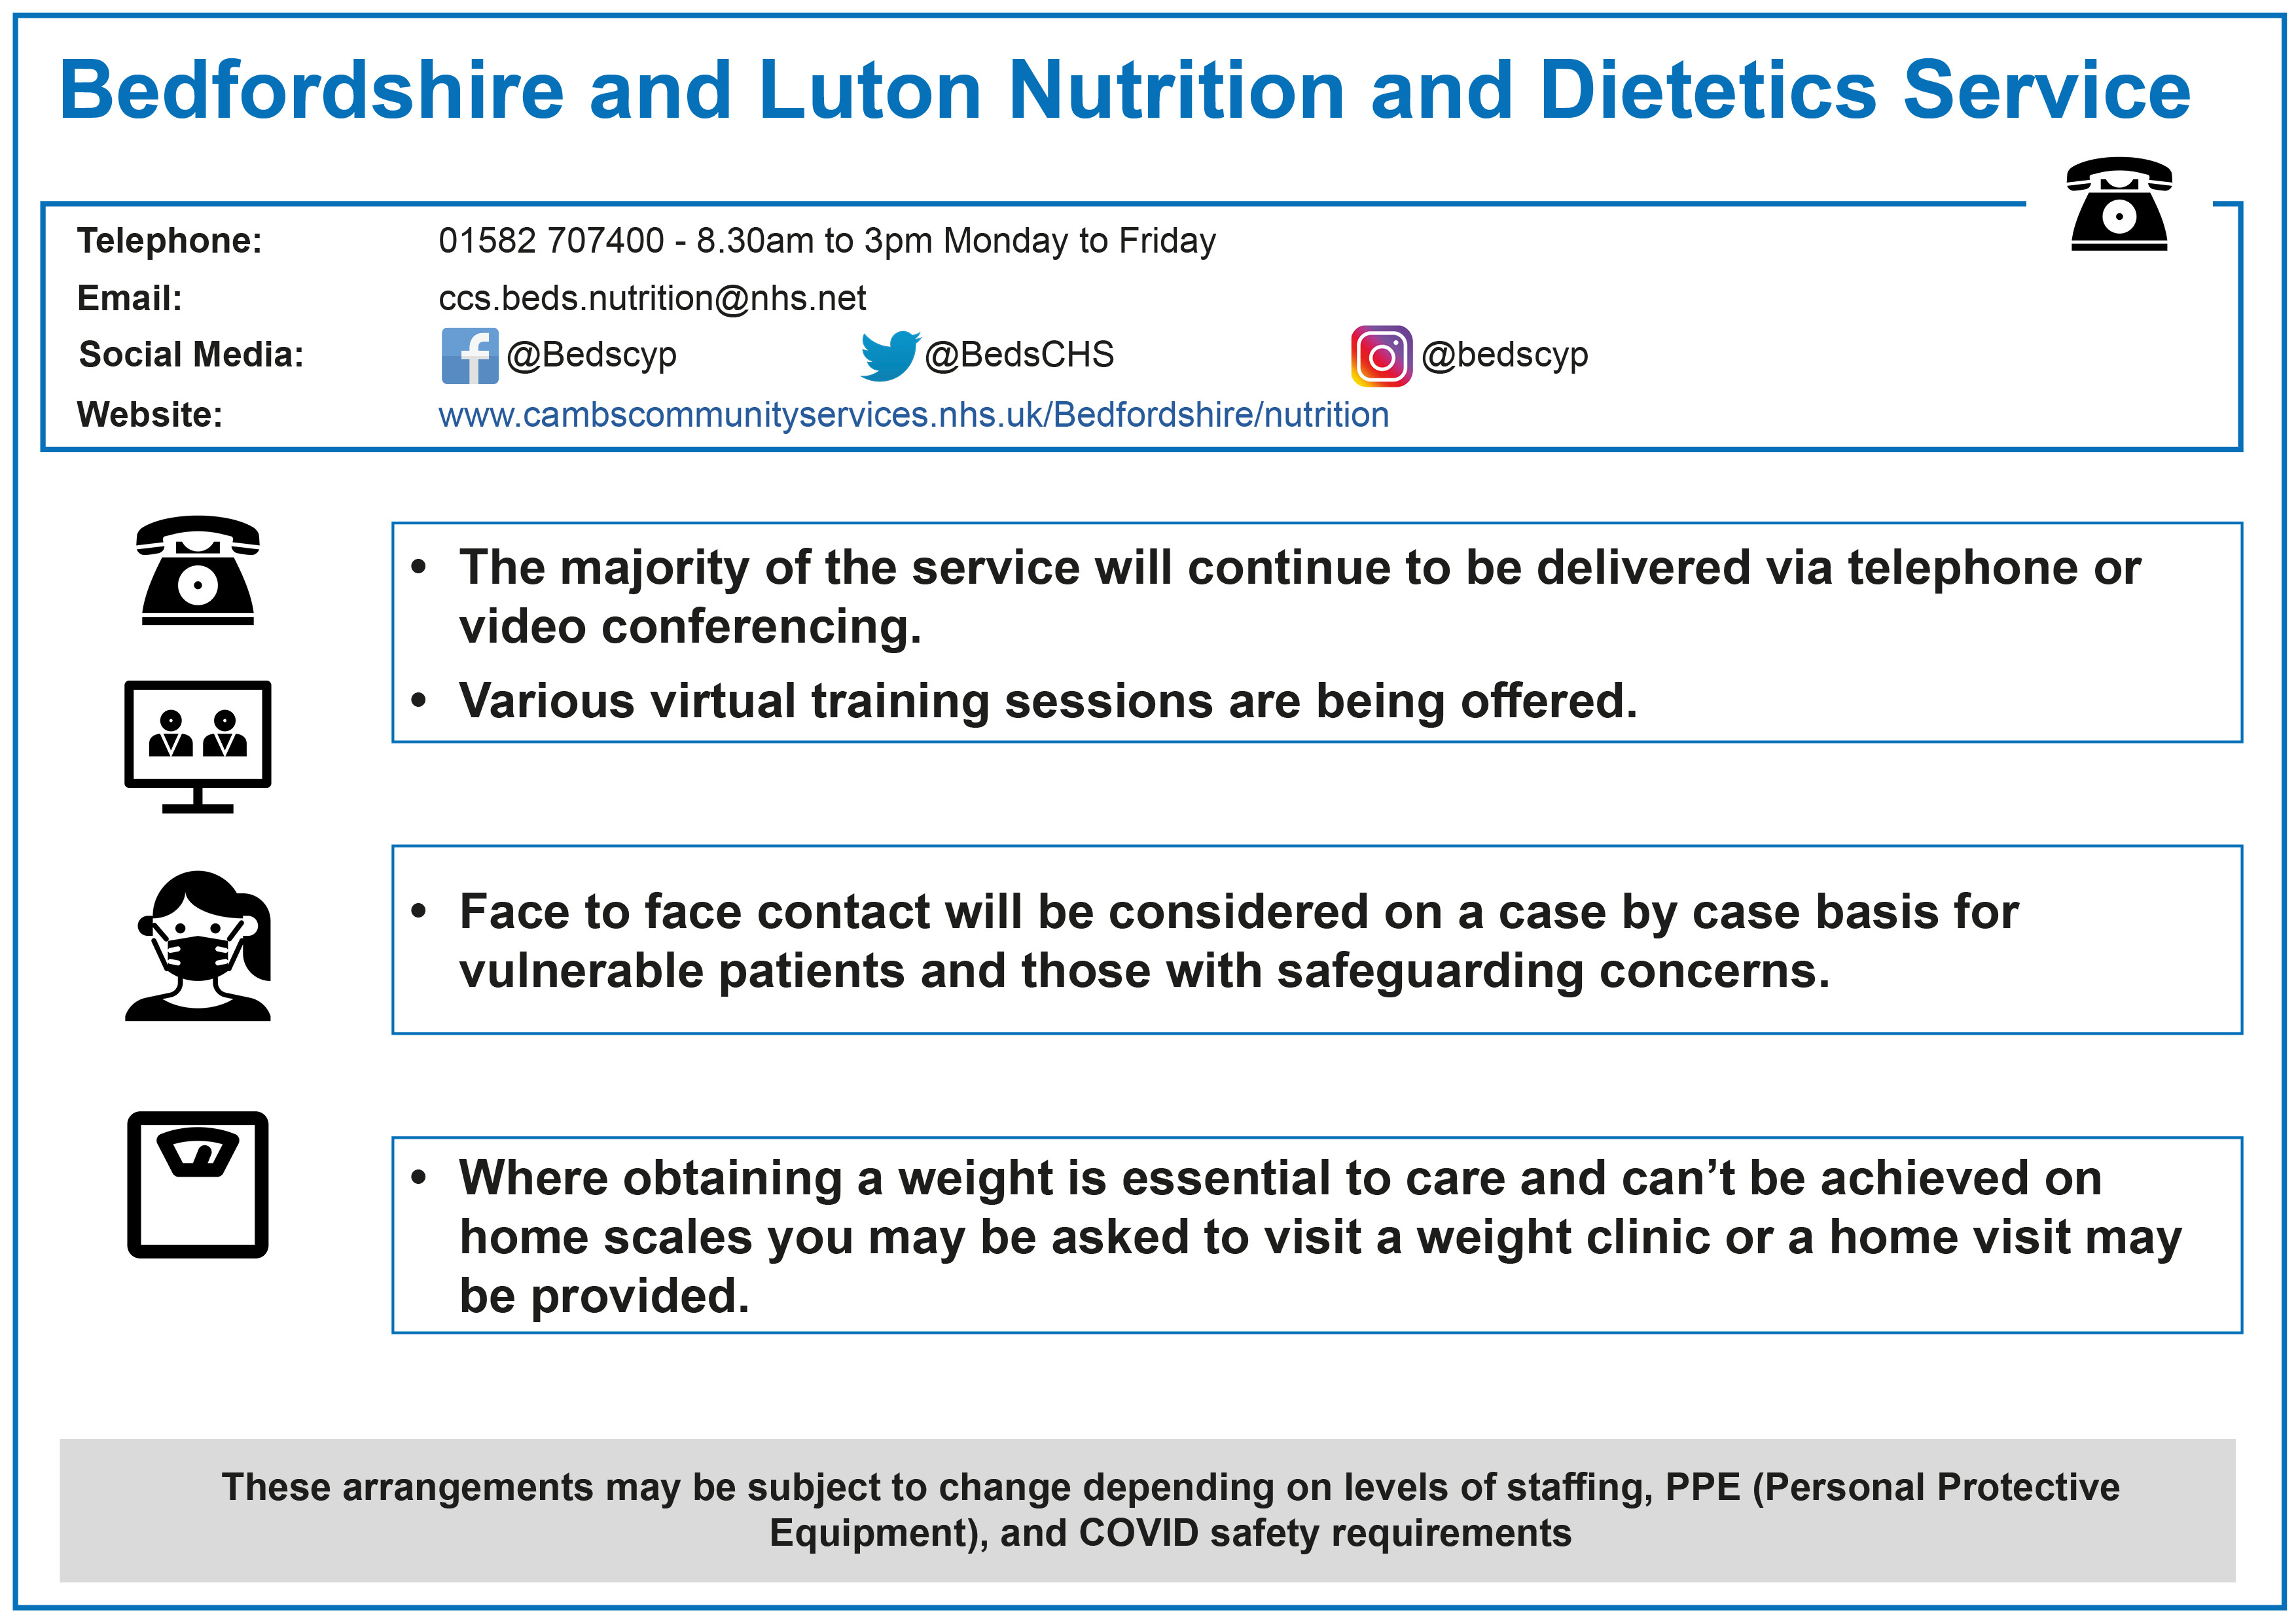 Beds Nutrition and Dietetics Service.indd v3